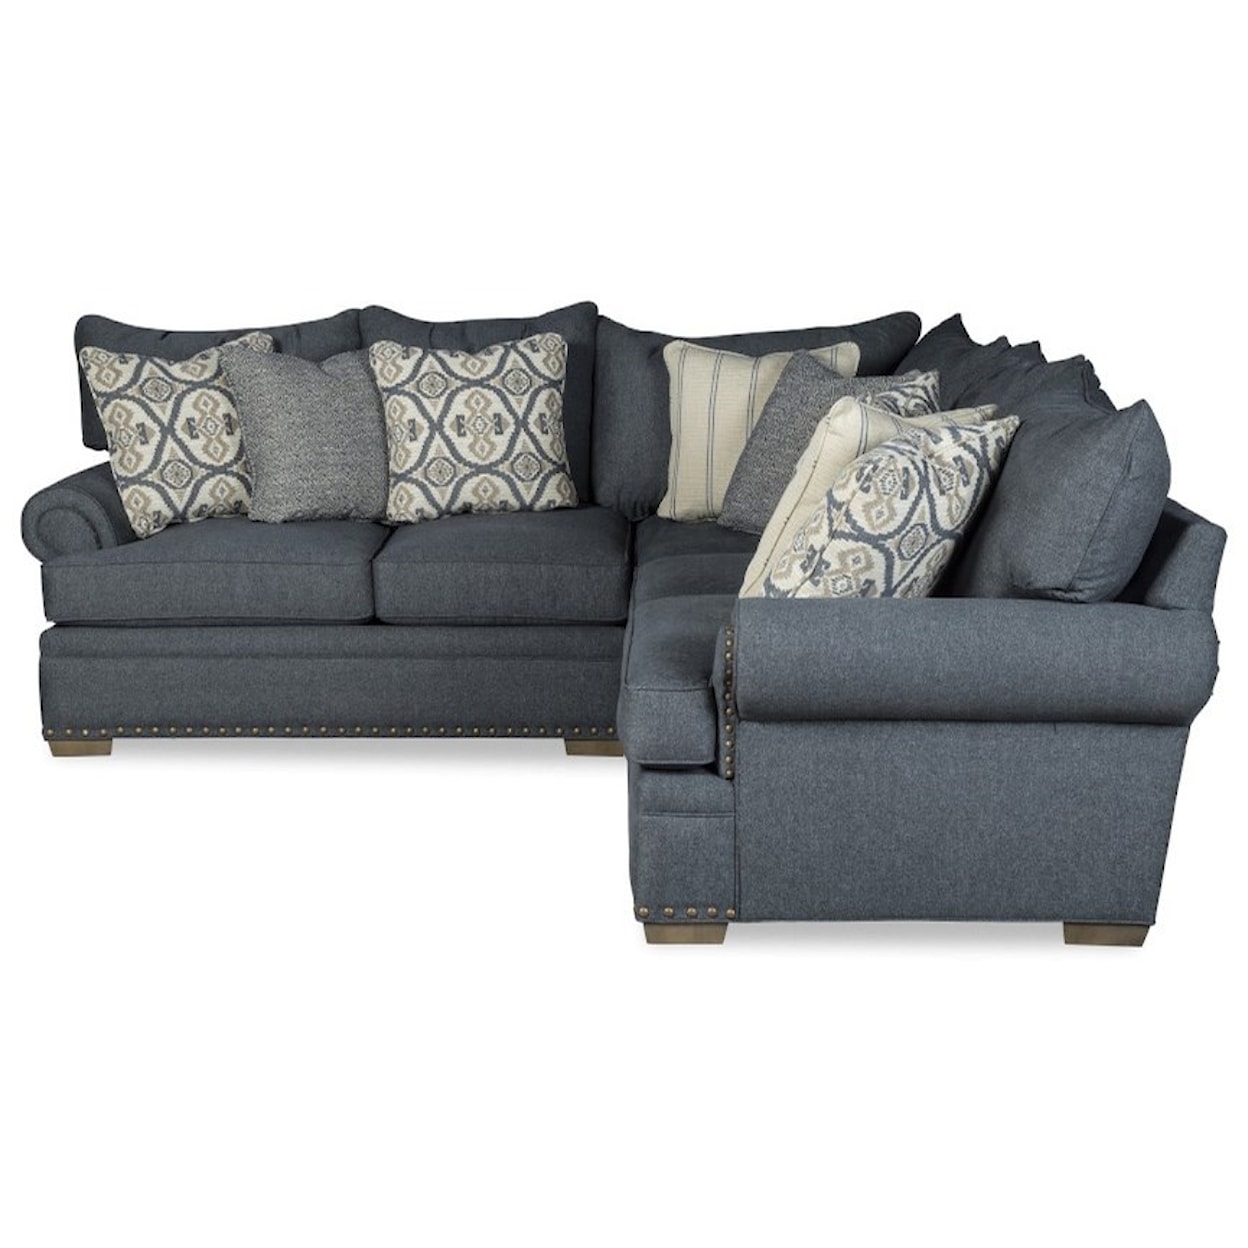 Hickory Craft 701650 4-Seat Sectional Sofa w/ LAF Loveseat